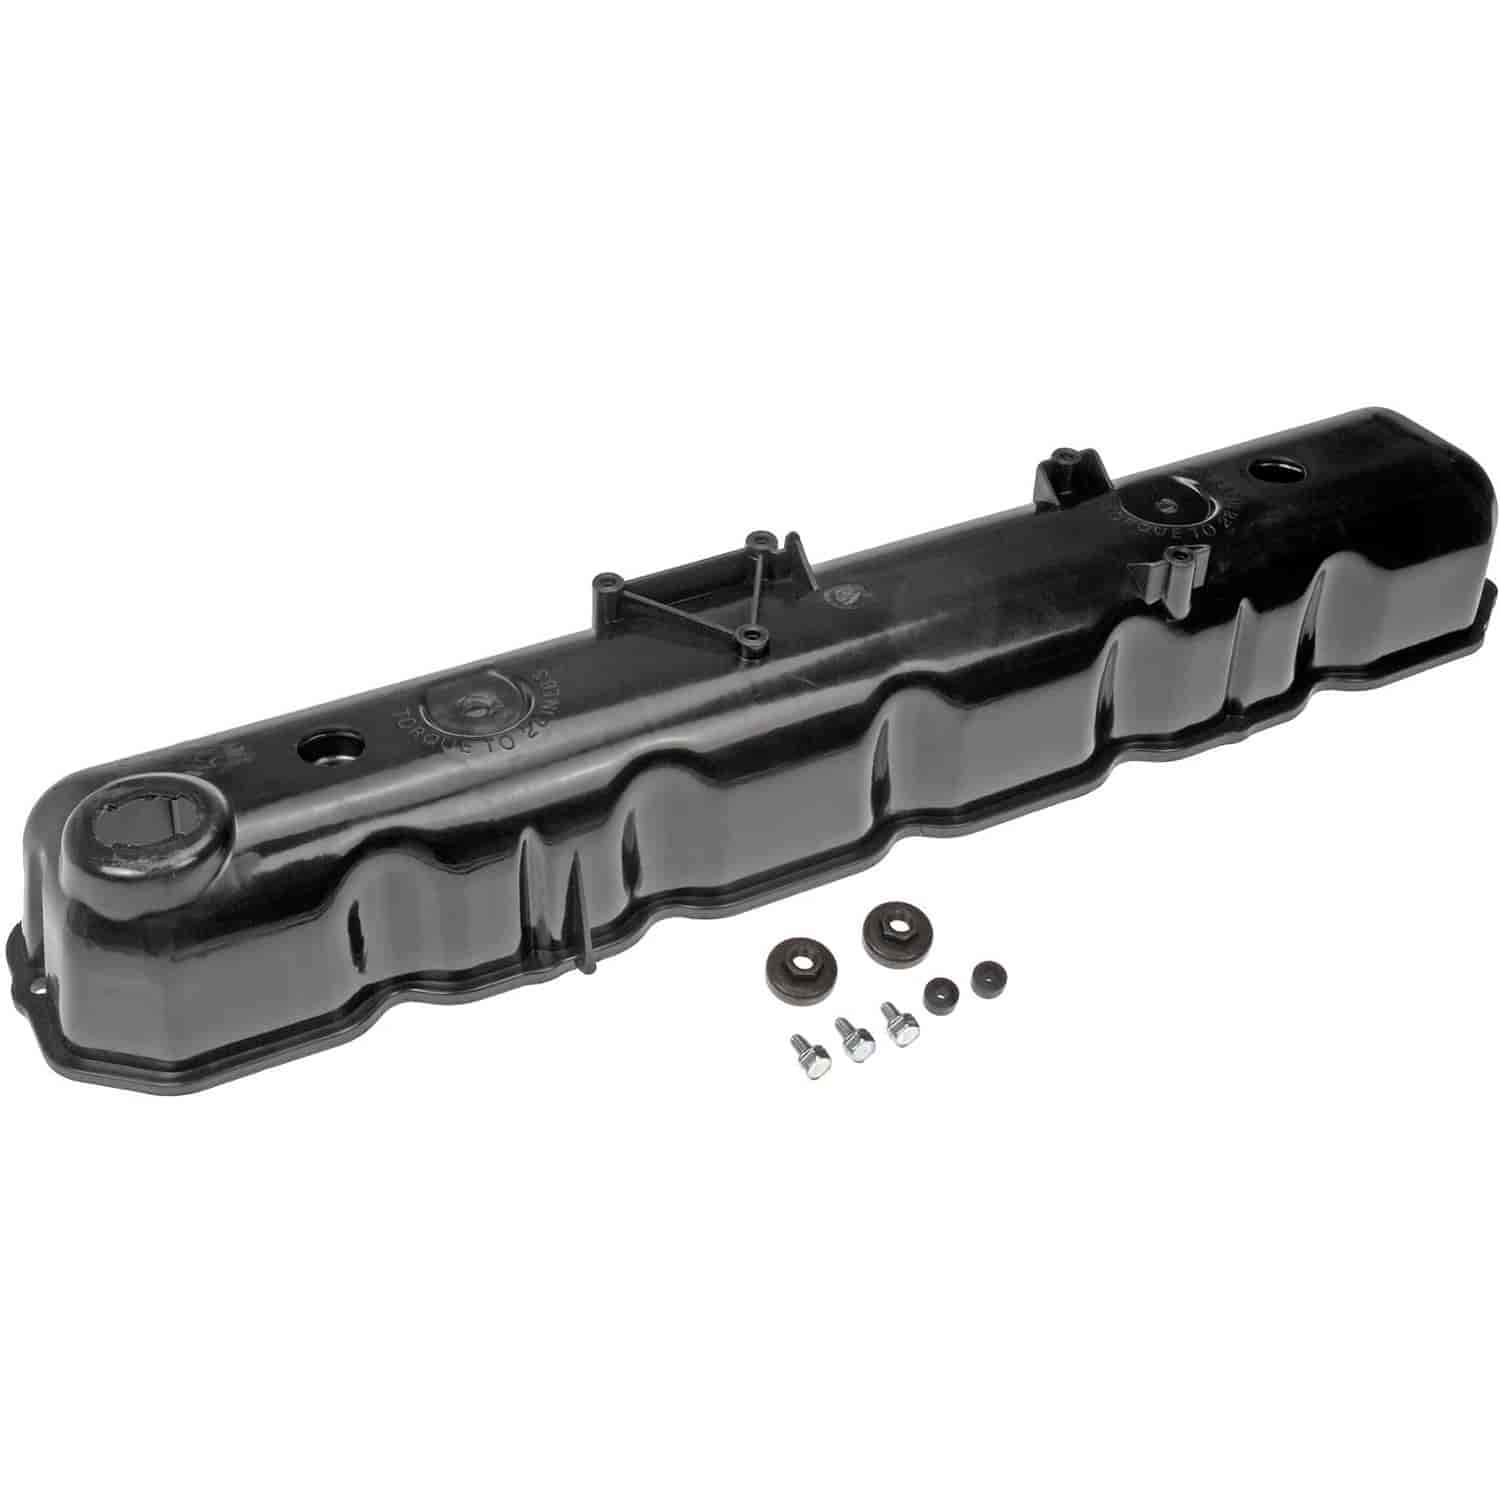 Valve Cover Kit - Does Not Include Gasket